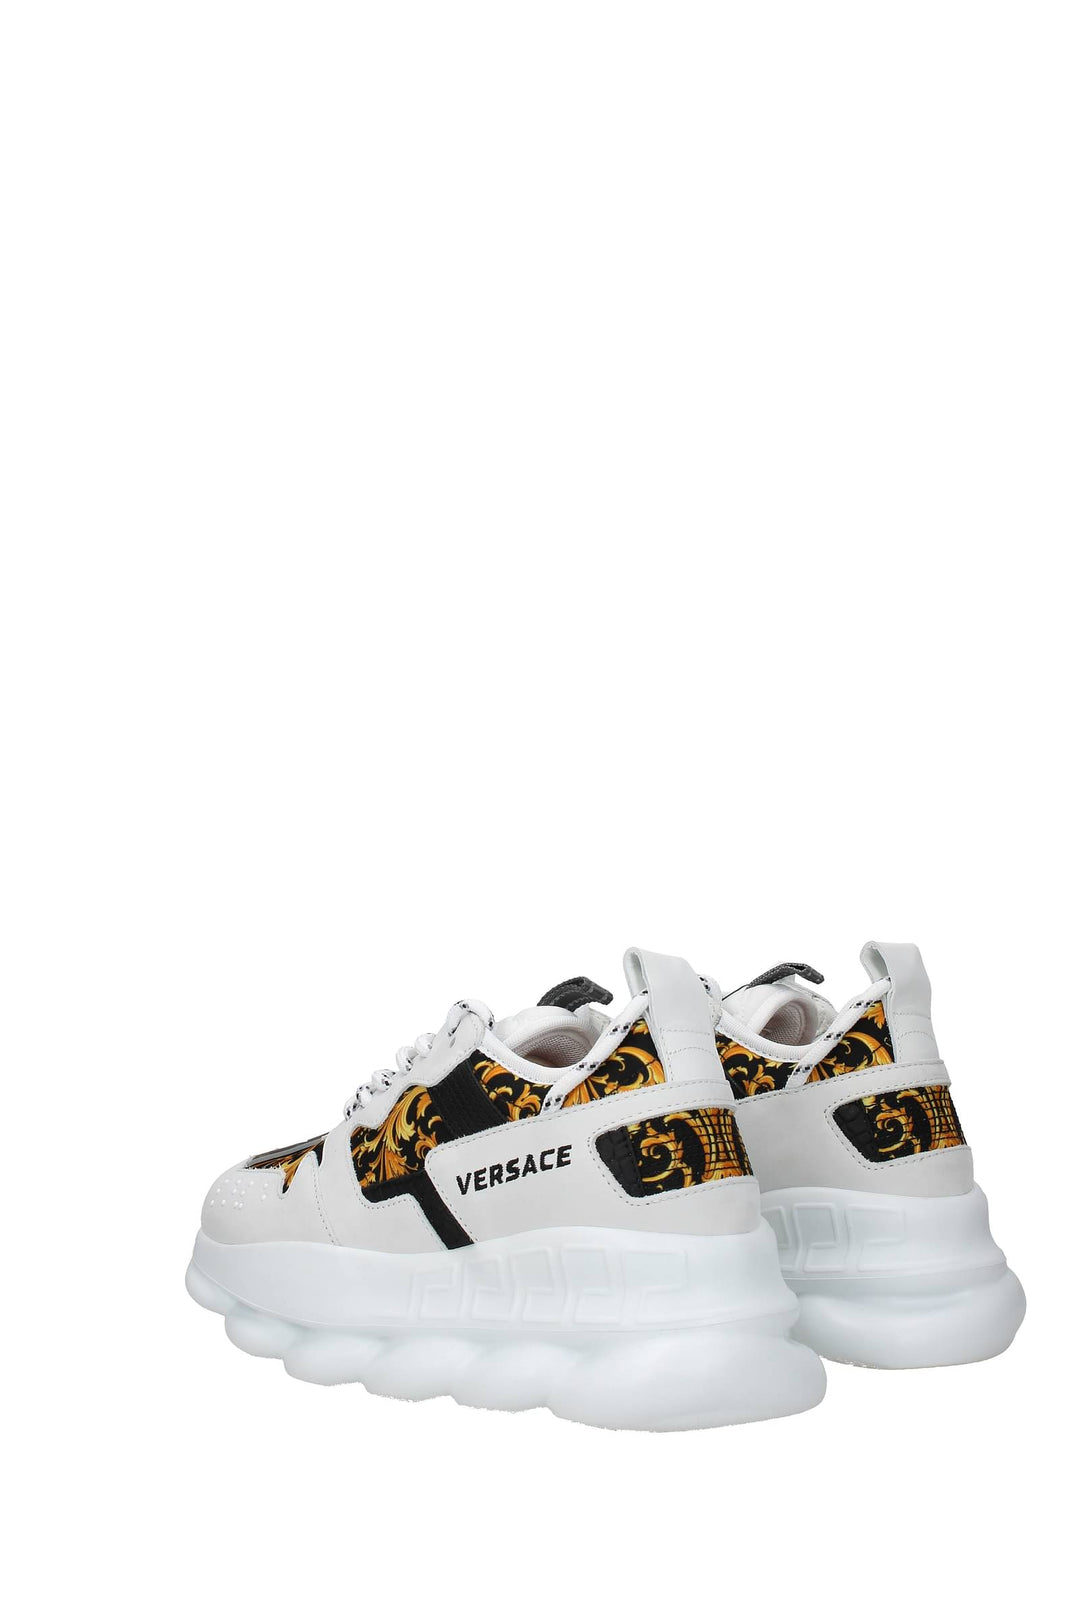 Sneakers Chain Reaction 2 Camoscio Bianco - Versace - Donna